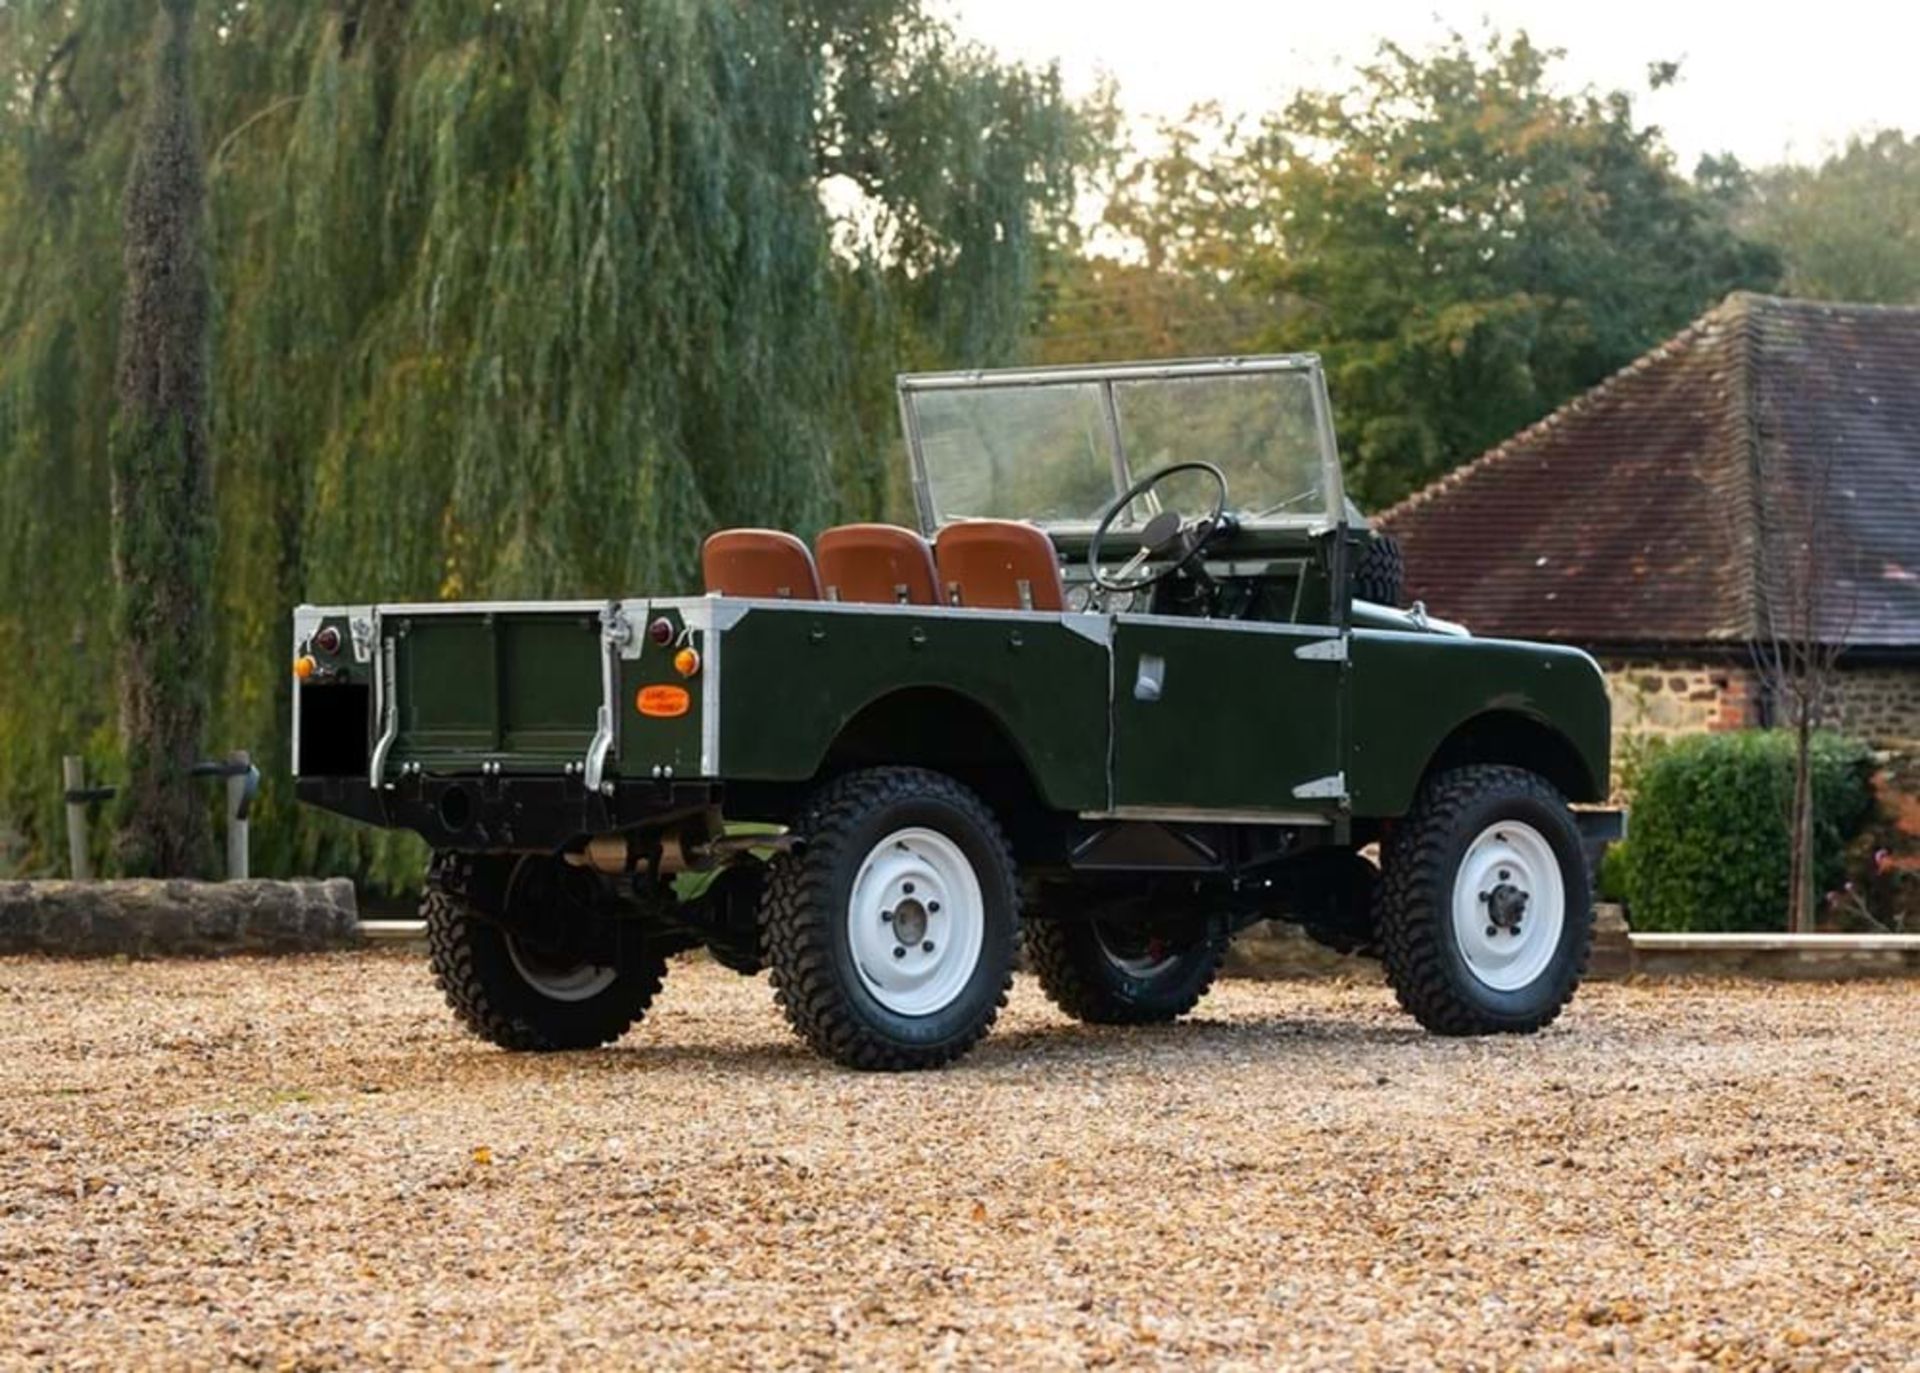 1955 Land Rover Series I (86") - Image 5 of 10